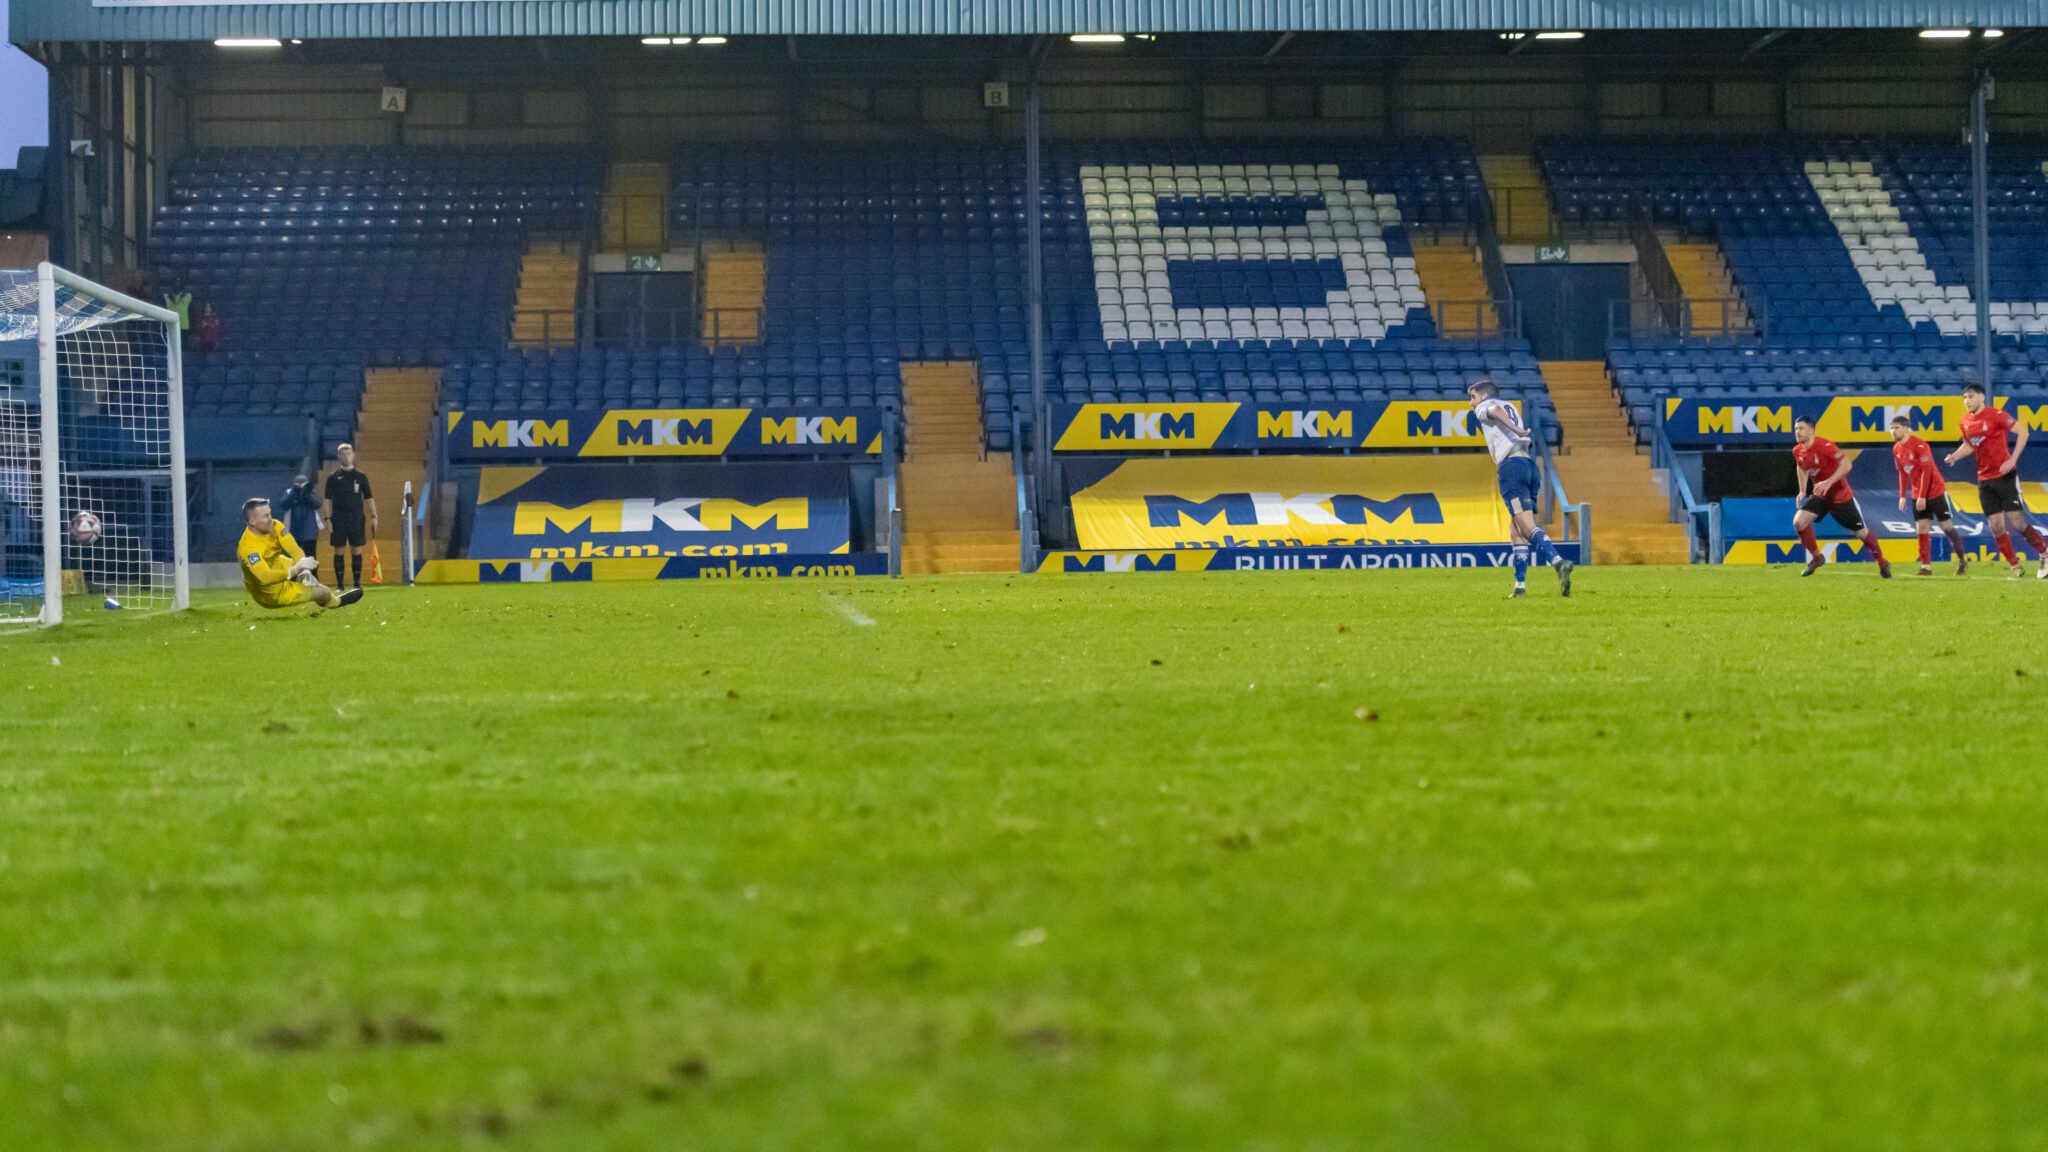 More information about "Gigg Lane: Penalty Spot Raffle"